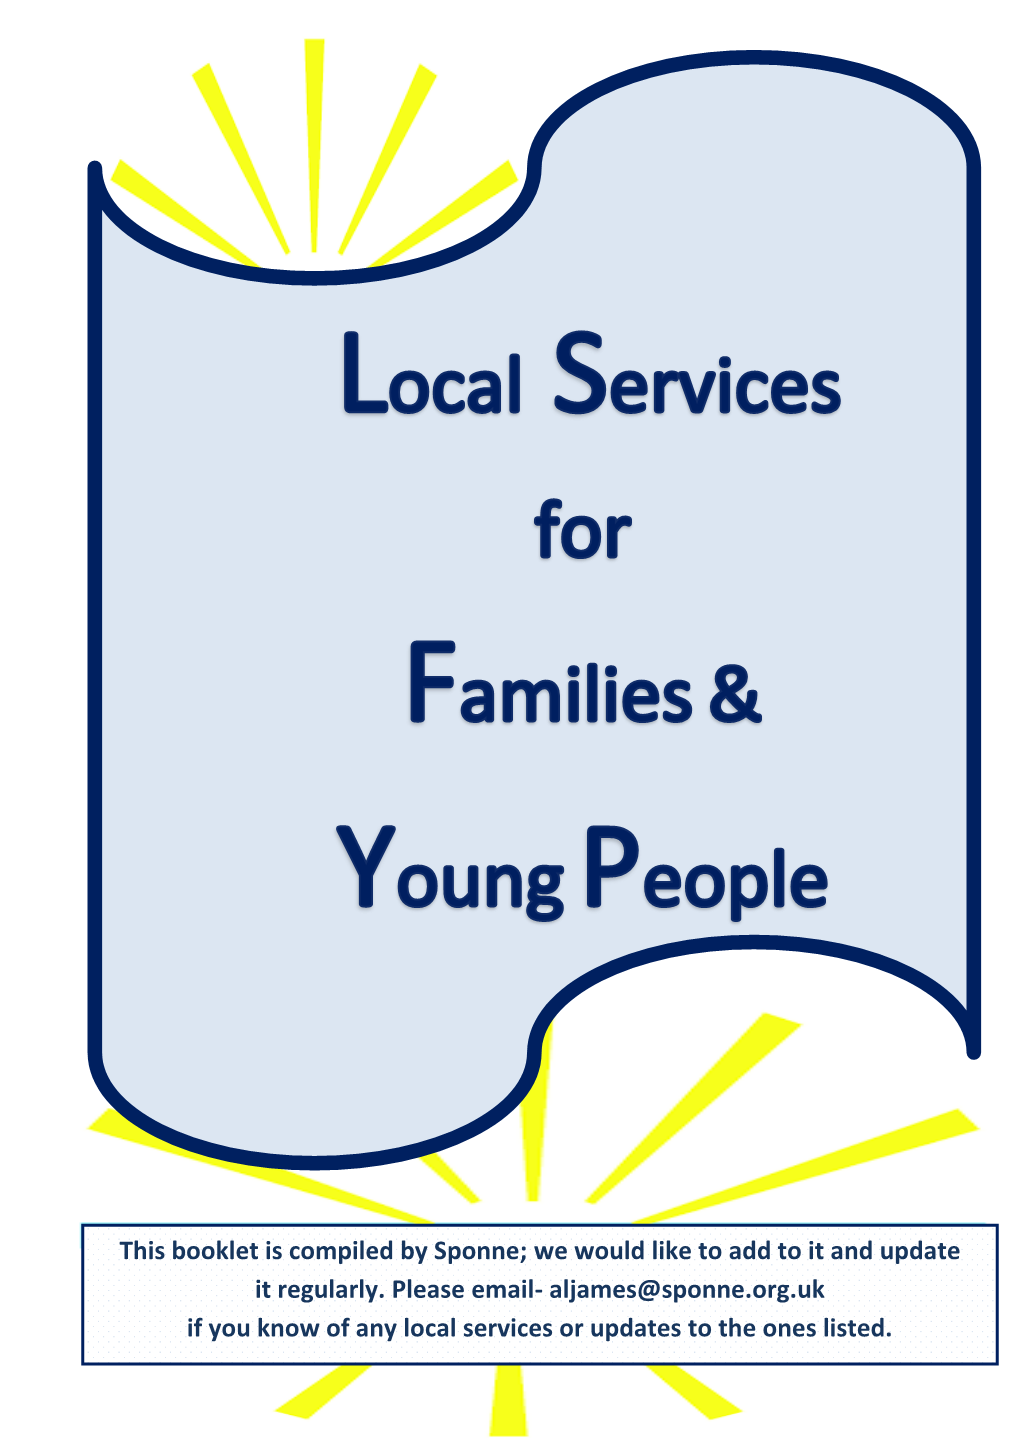 Local Services for Families & Young People-Updated